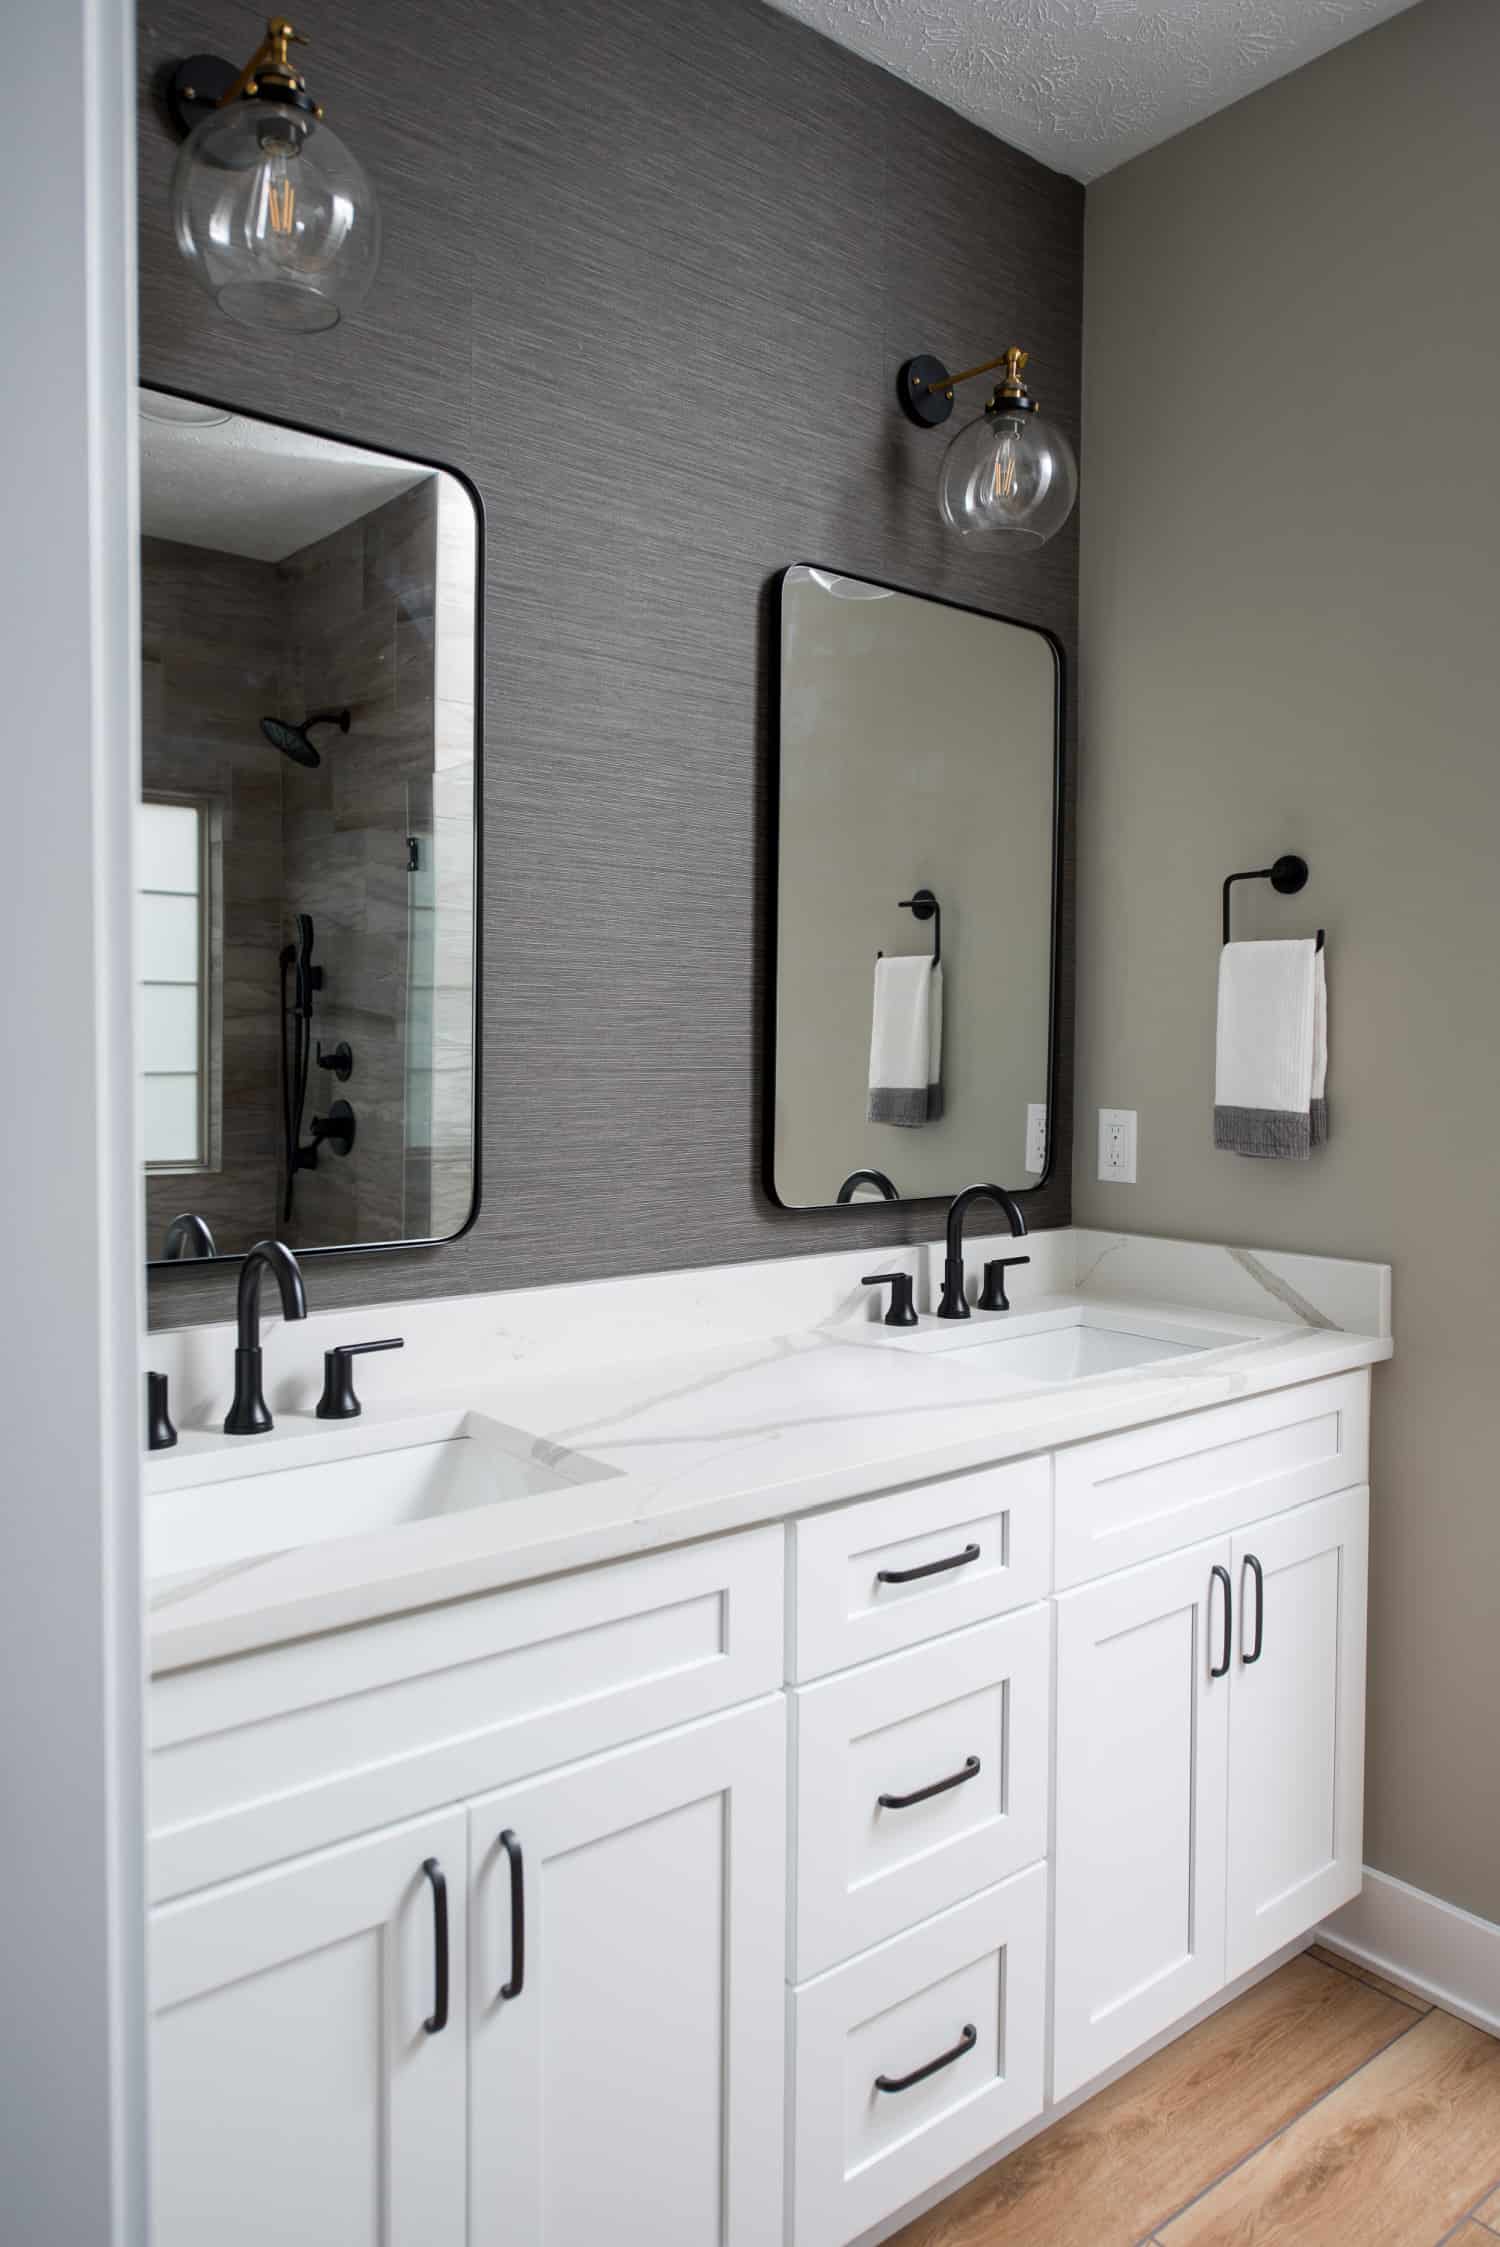 Nicholas Design Build | A modern bathroom with two sinks and a mirror.